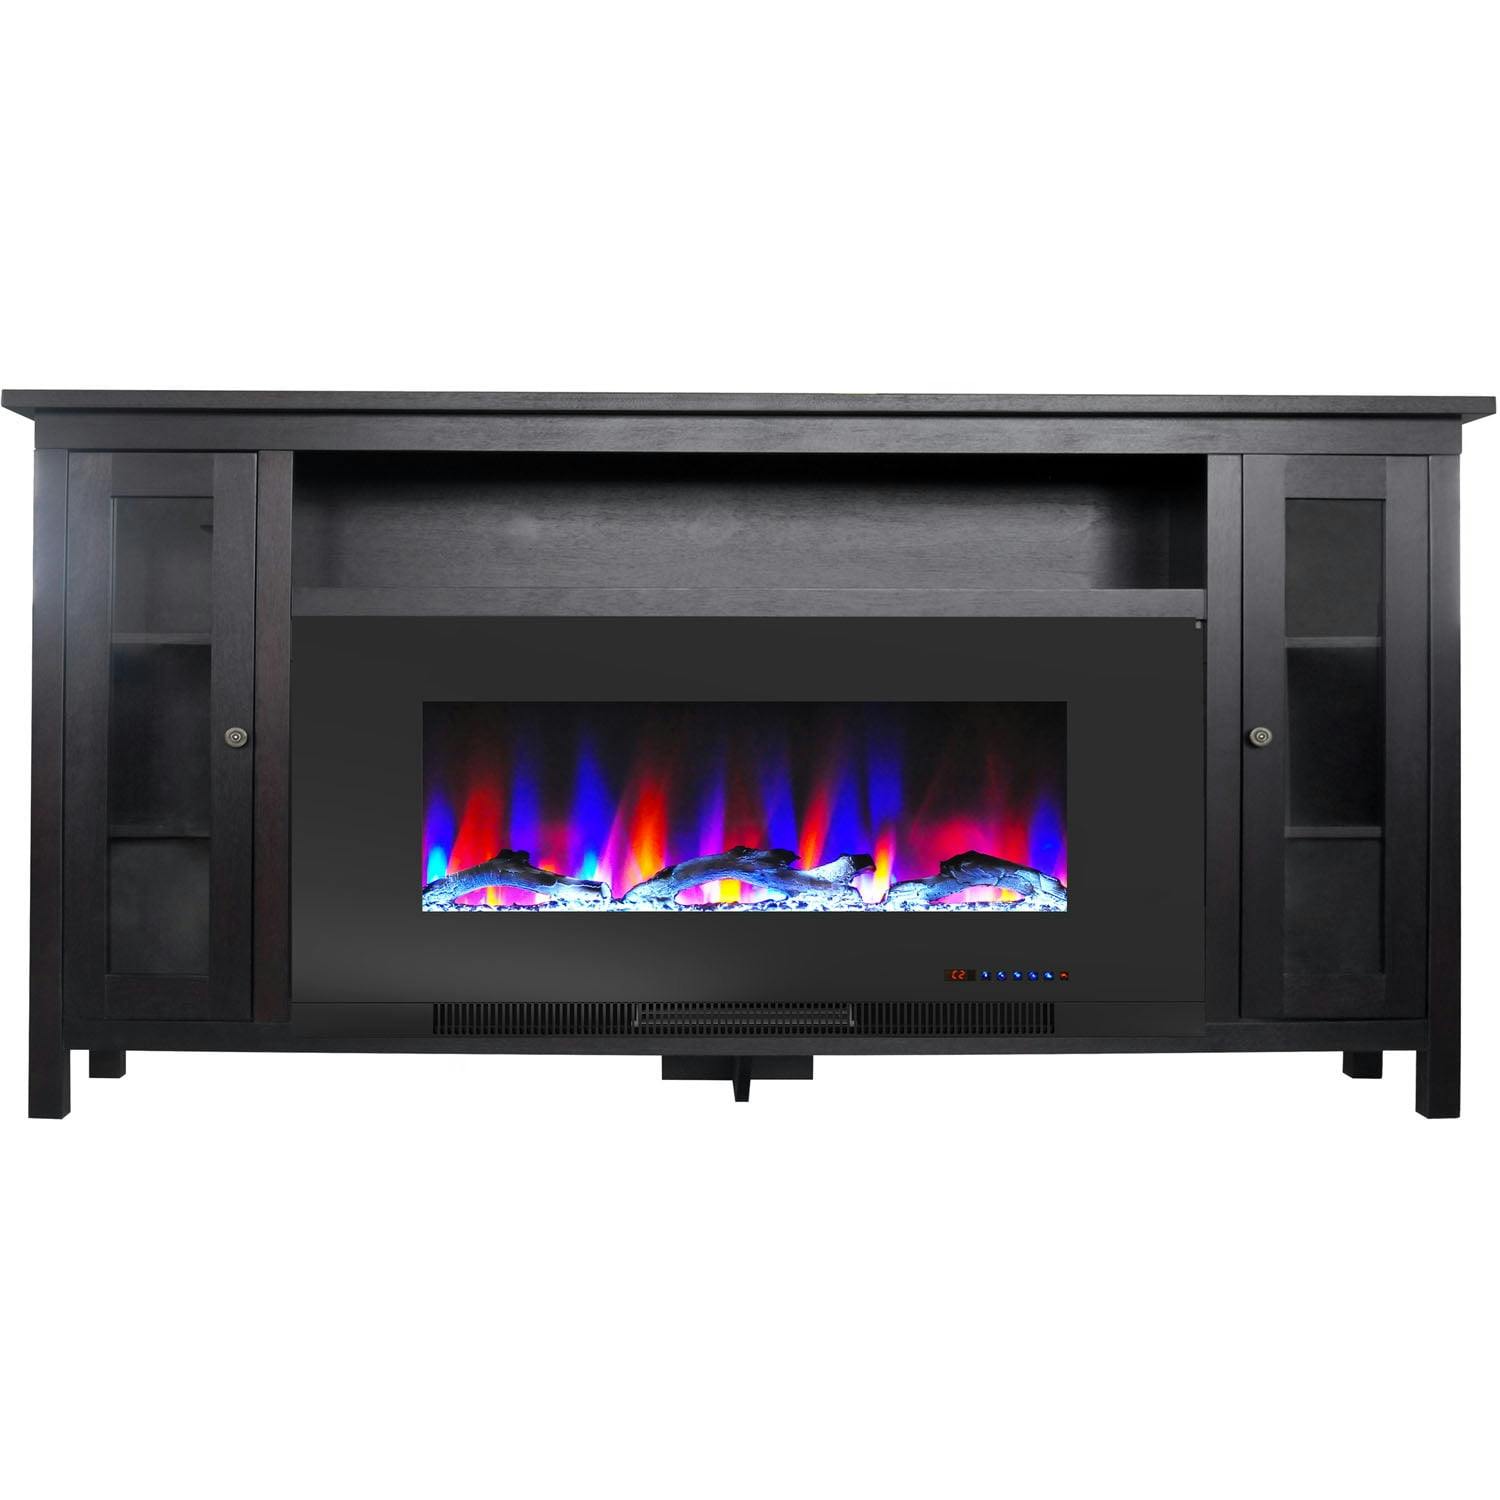 Somerset 70-Inch Black Coffee Electric Fireplace TV Stand with LED Flames